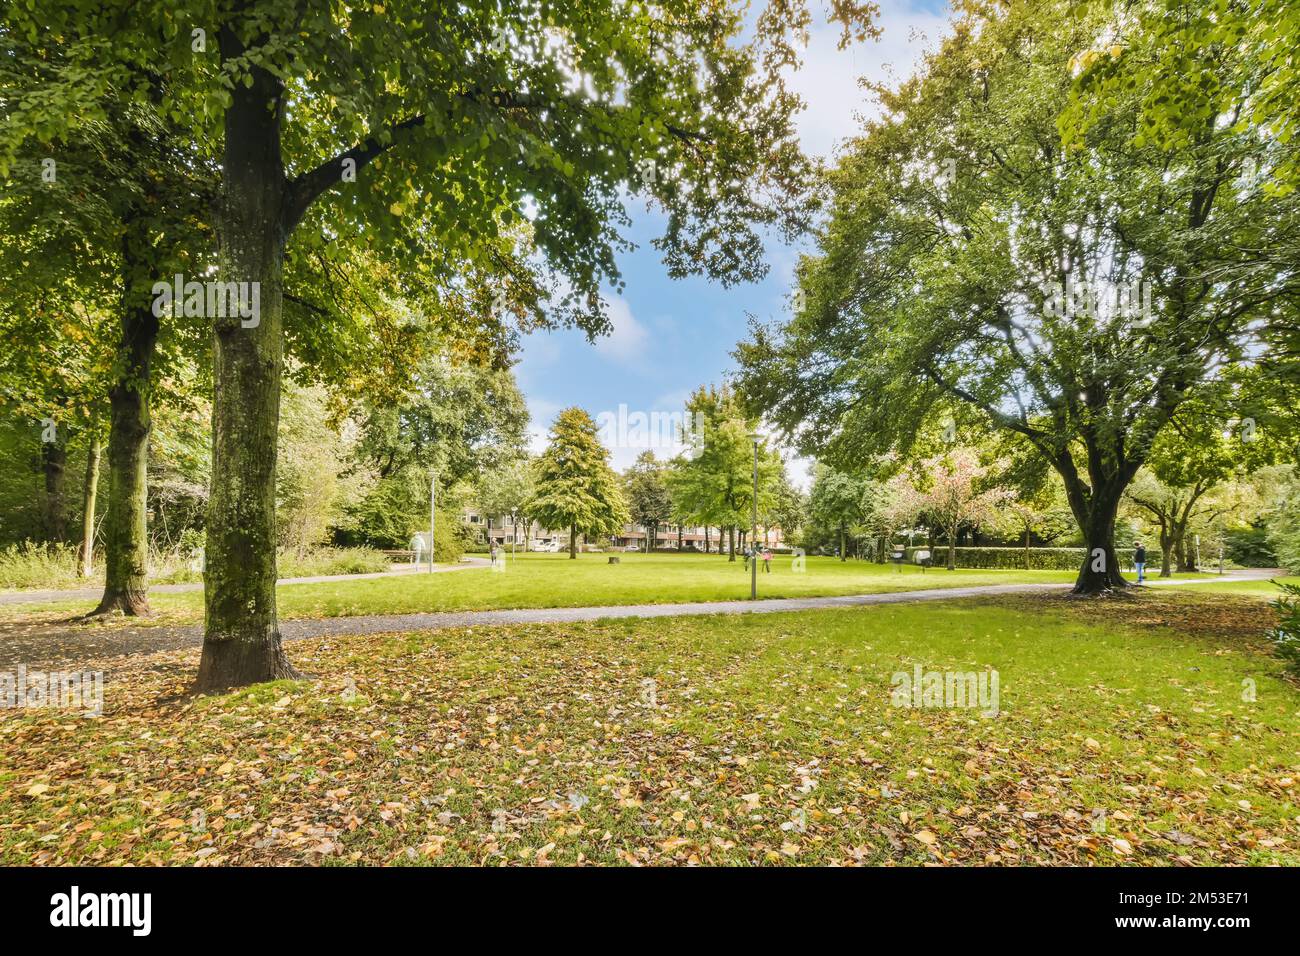 an empty park with trees and leaves on the ground in autumn time stock photo - 1230976 Stock Photo